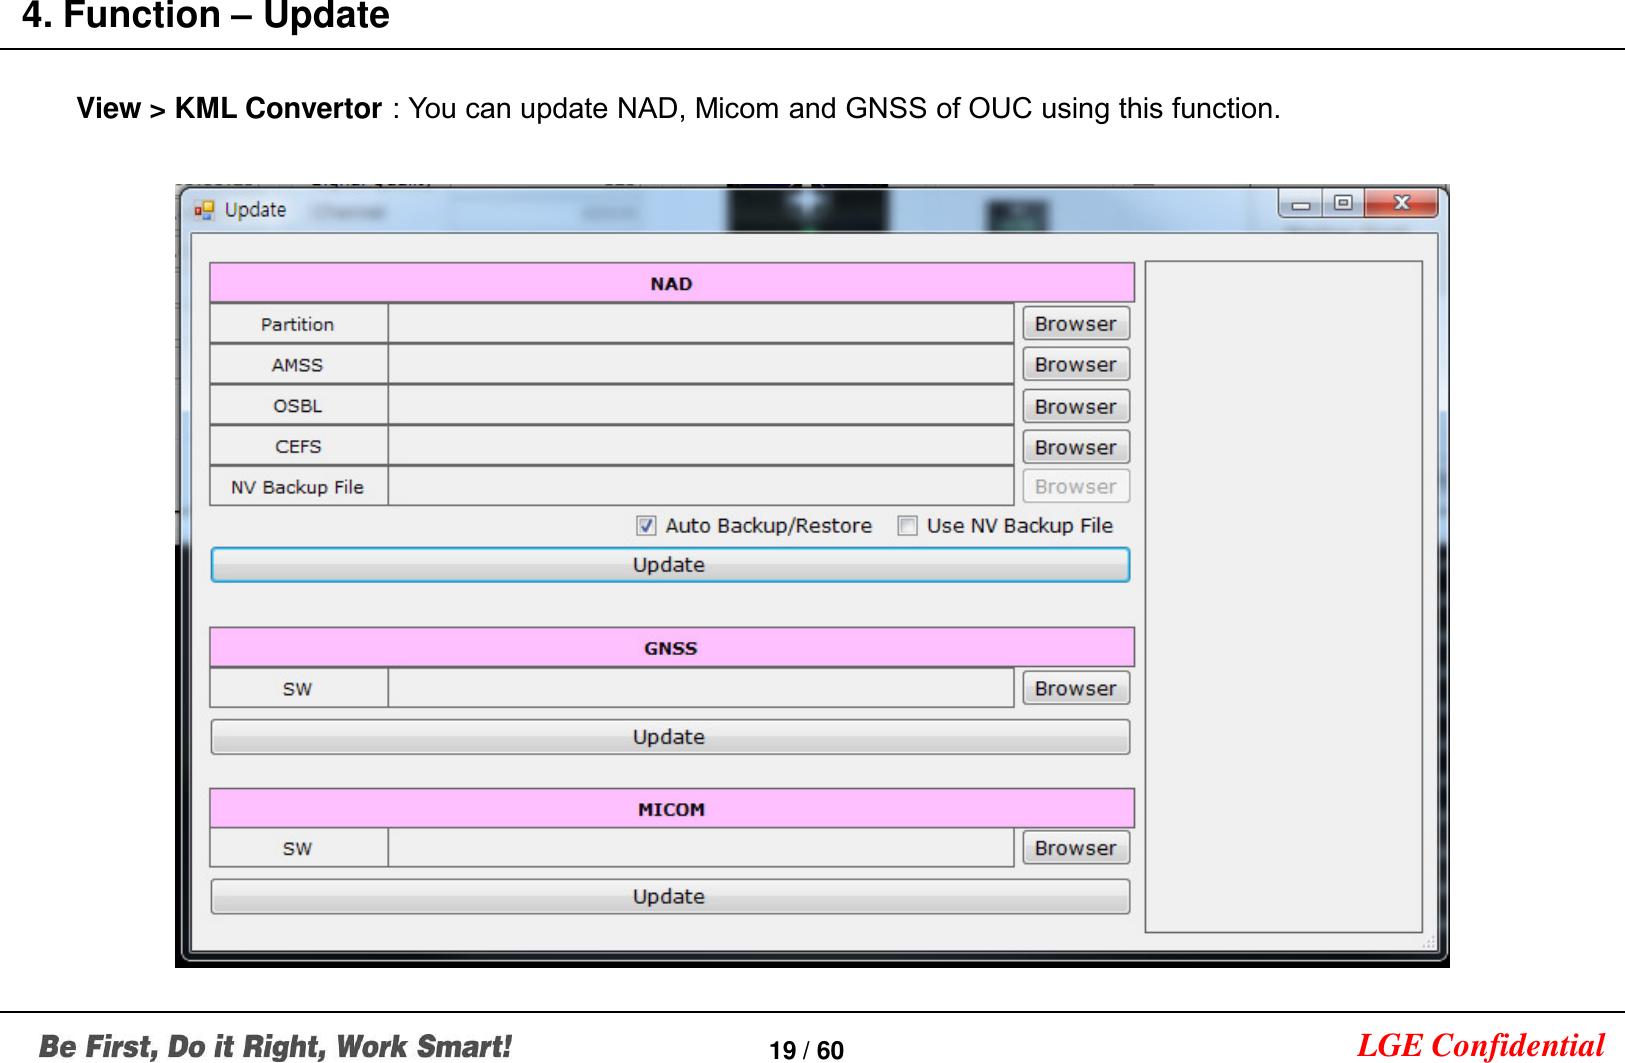 LGE Confidential4. Function –Update19 / 60View &gt; KML Convertor : You can update NAD, Micom and GNSS of OUC using this function.